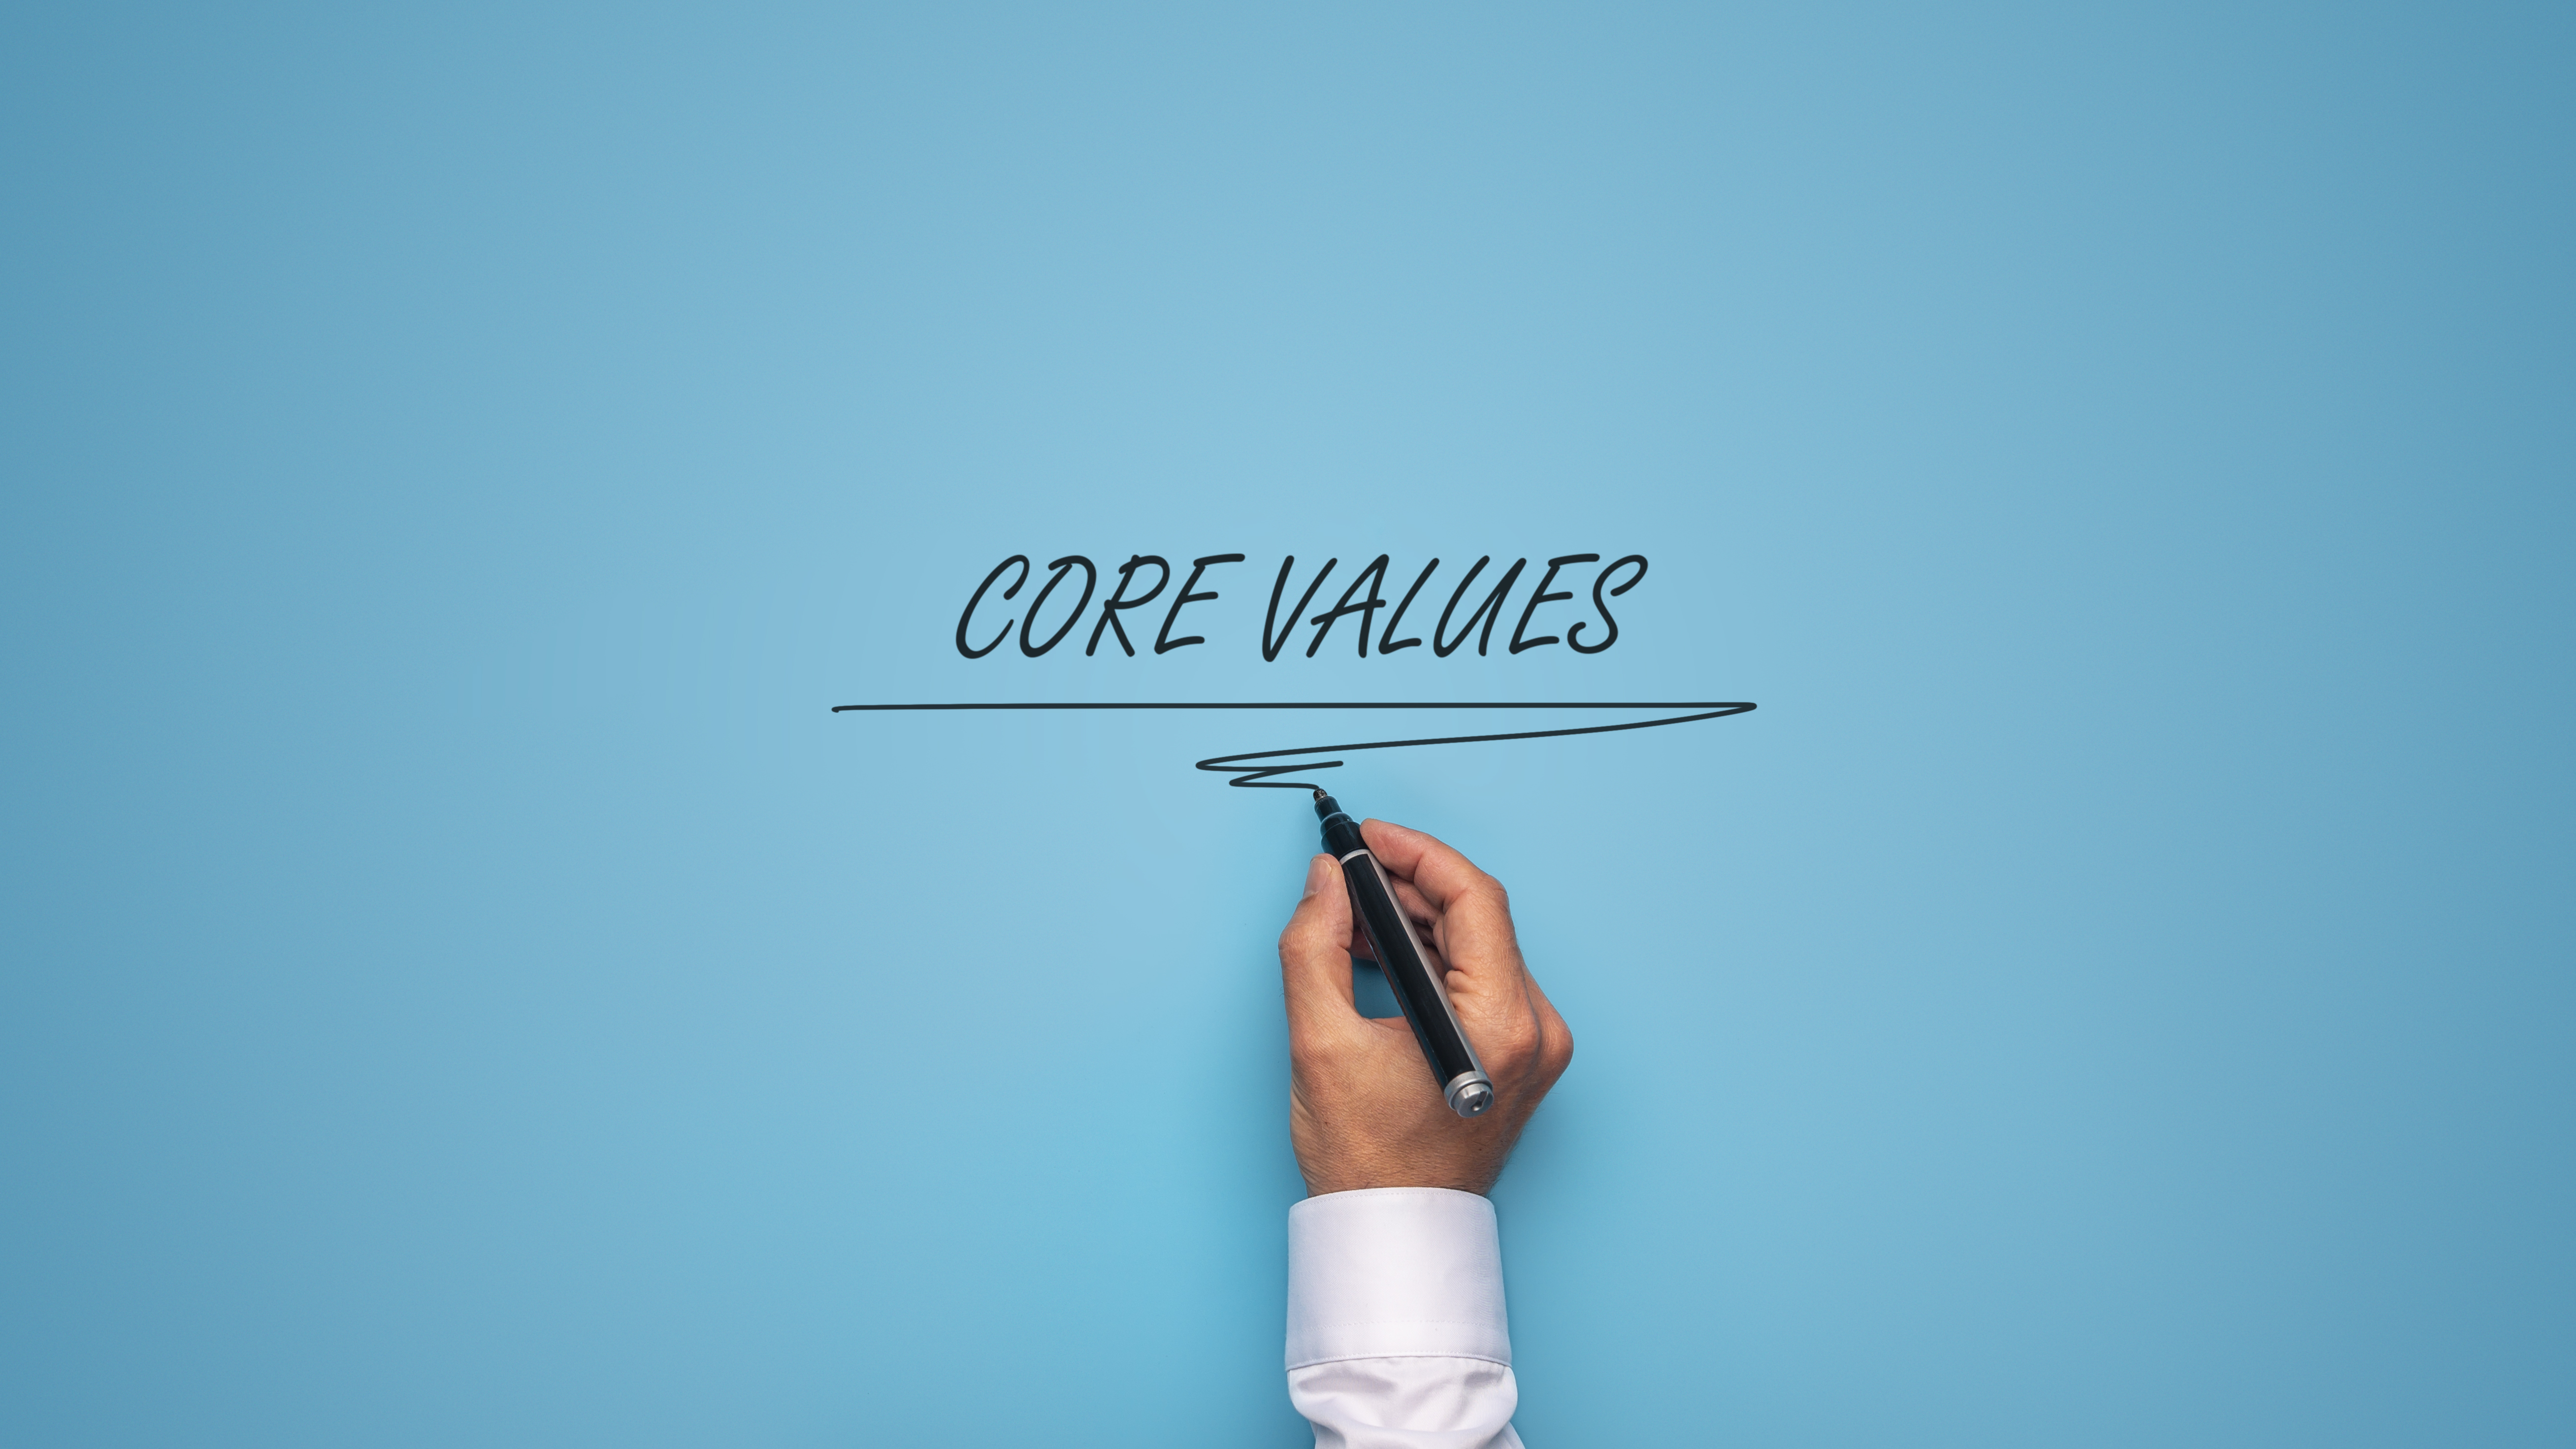 Our-Values2 image